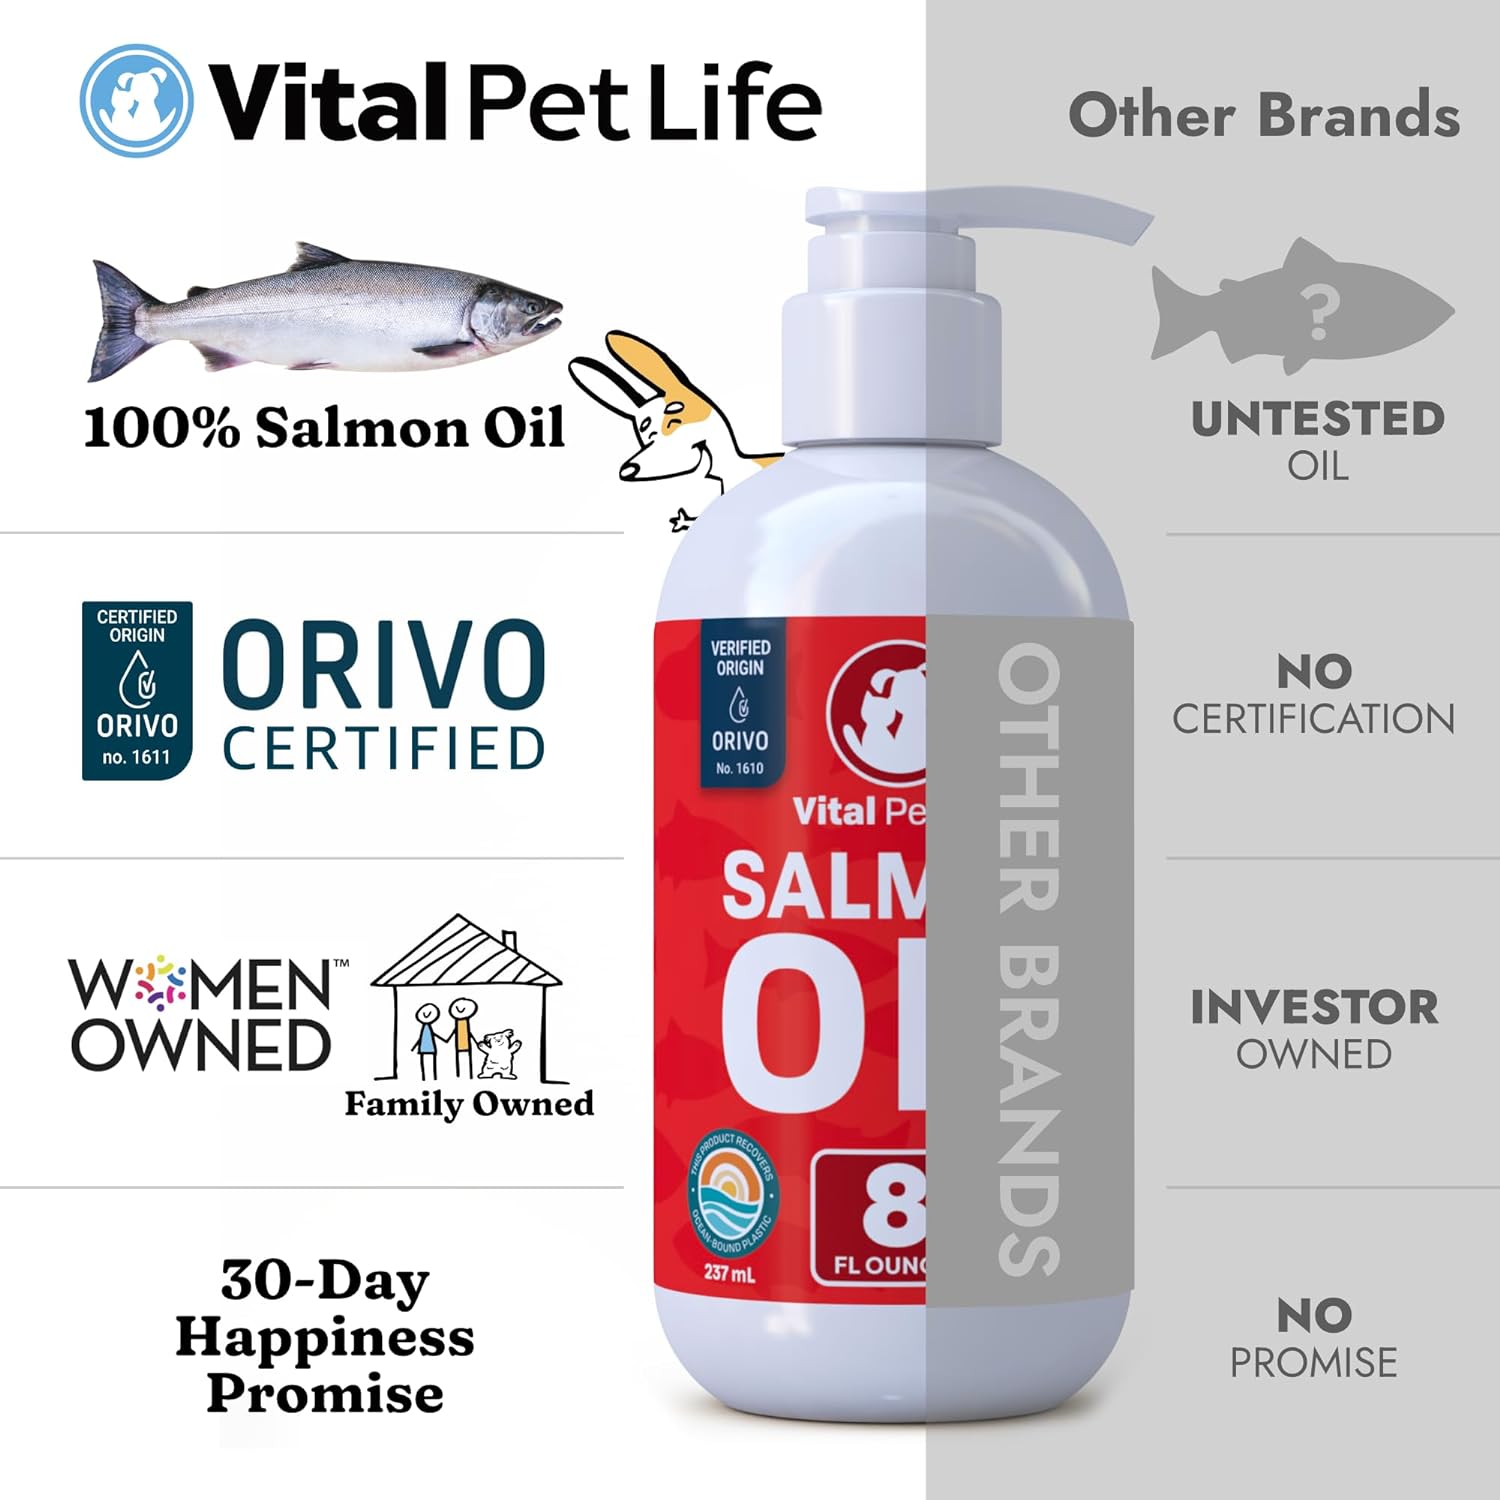 Salmon Oil for Dogs & Cats - Healthy Skin & Coat, Fish Oil, Omega 3 EPA DHA, Liquid Food Supplement for Pets, All Natural, Supports Joint & Bone Health, Natural Allergy & Inflammation Defense, 8 oz : Pet Supplies